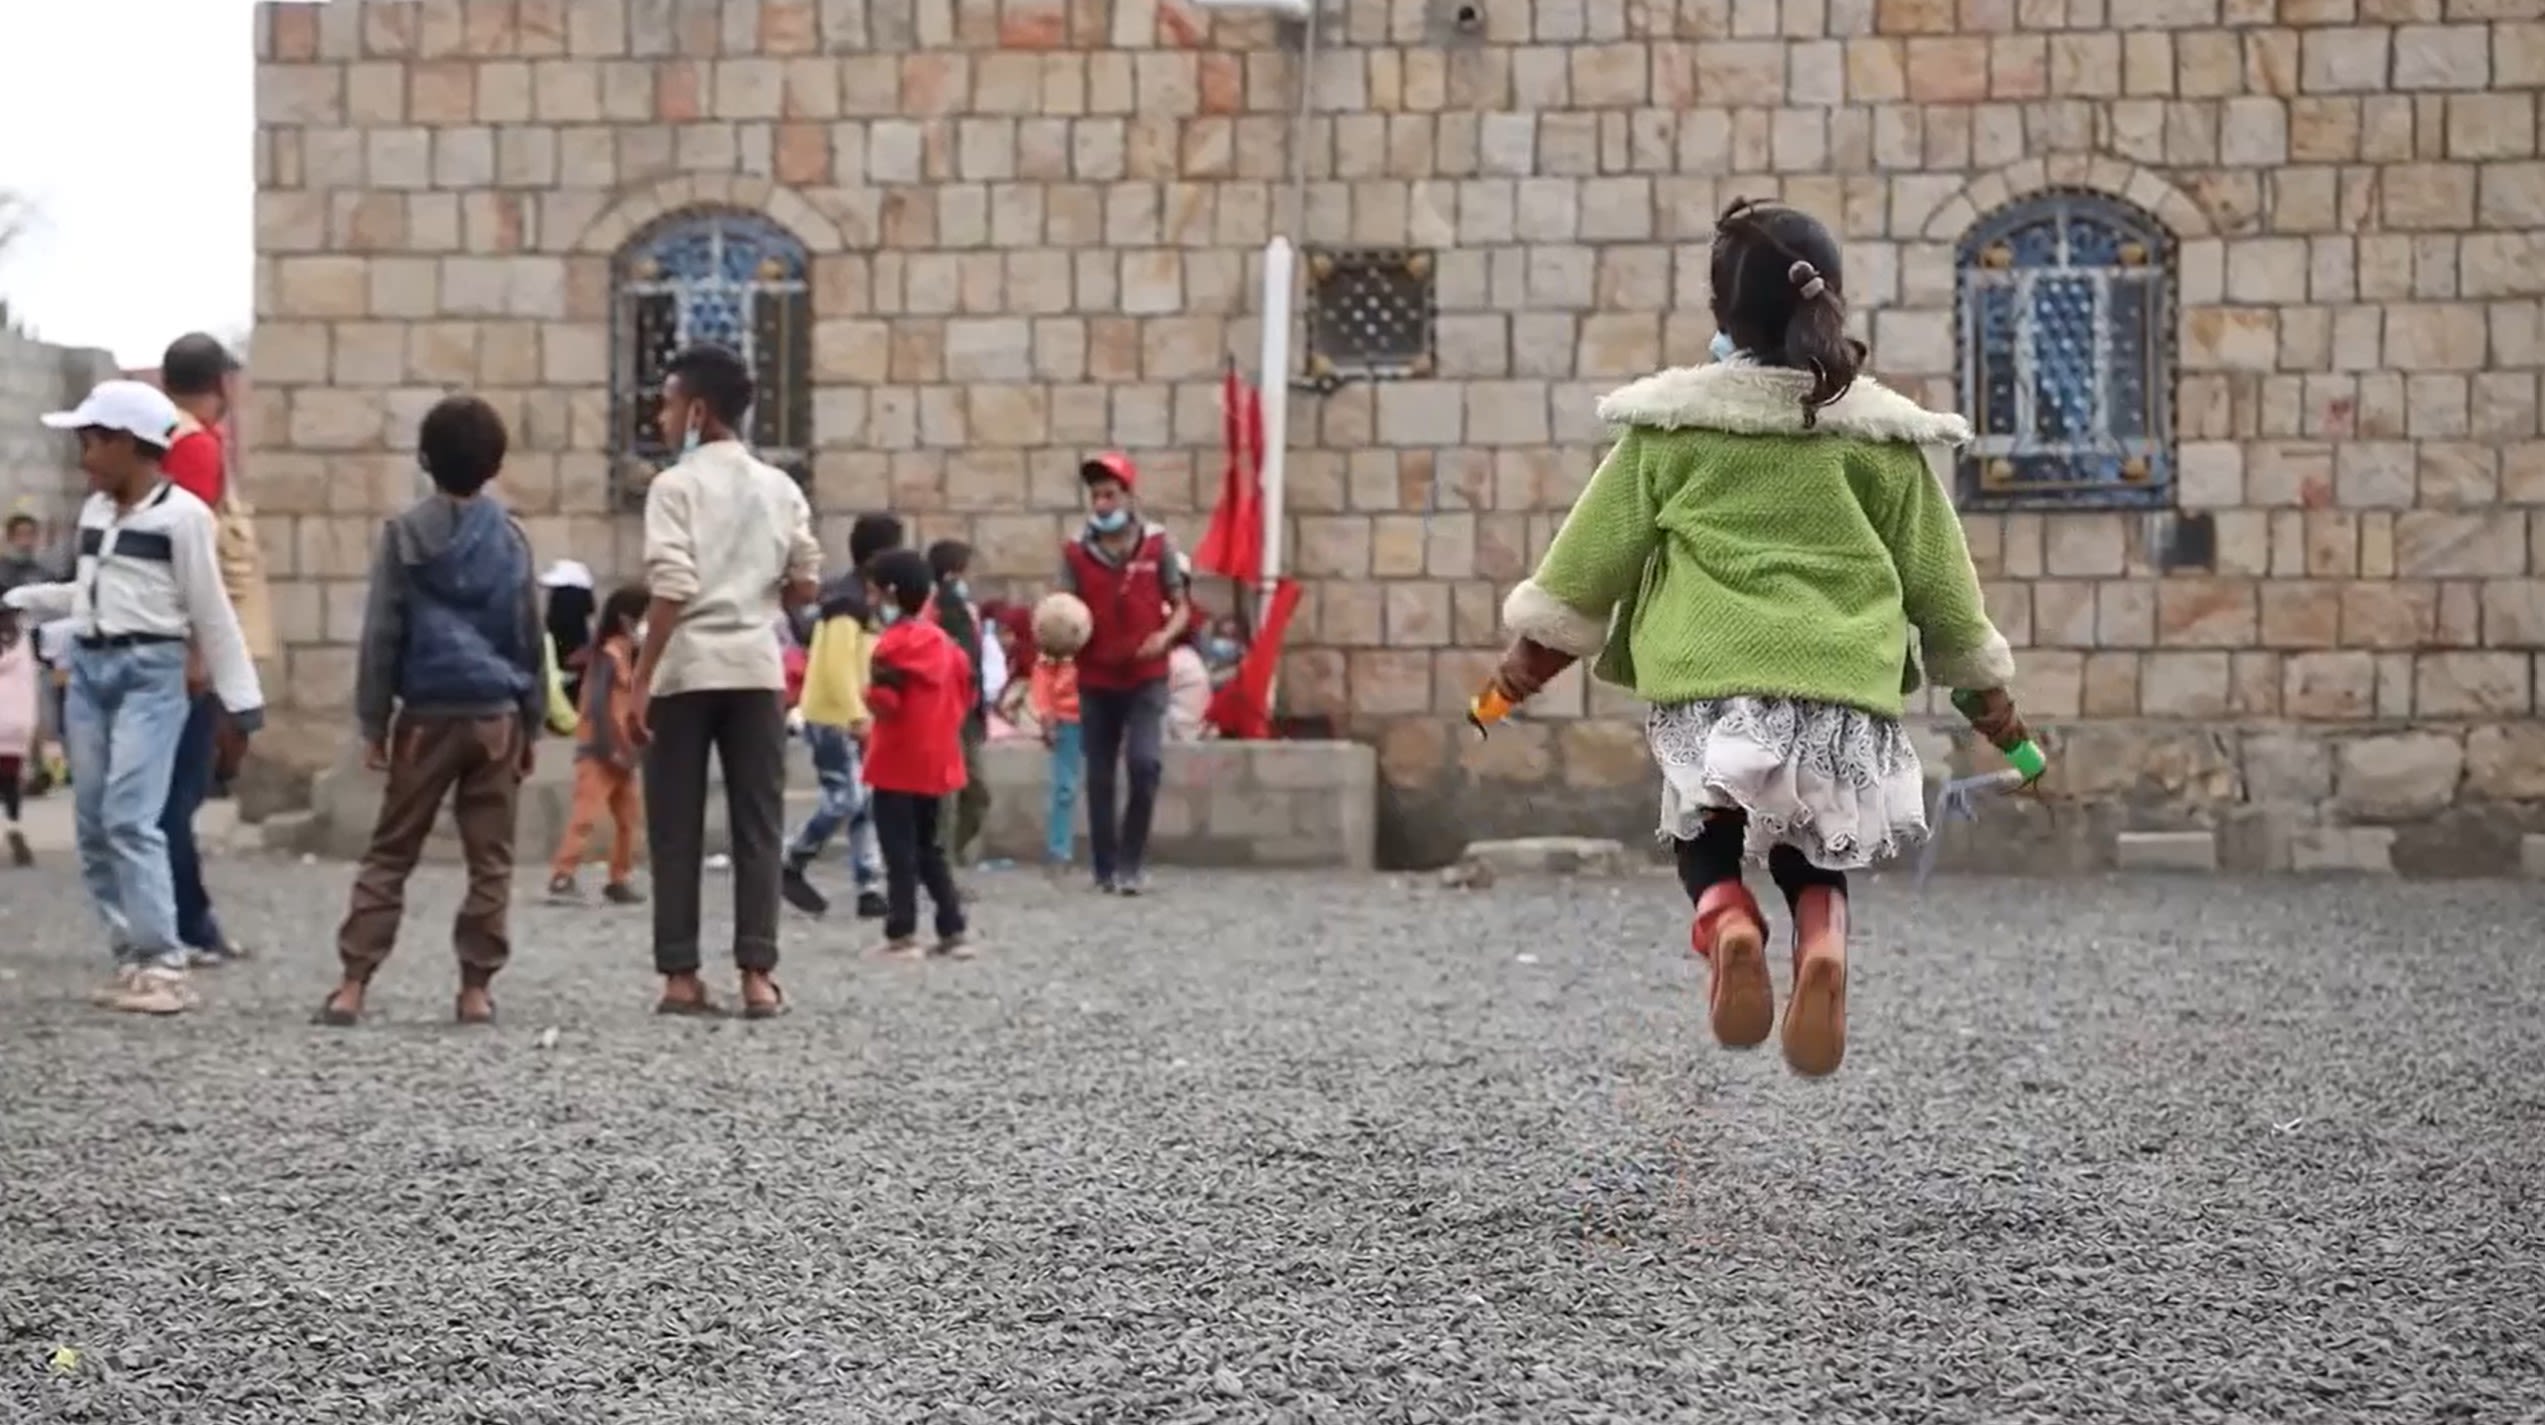 A young girl skipping in the play area of the social centre Taiz, Yemen. Photo: Save the Children.